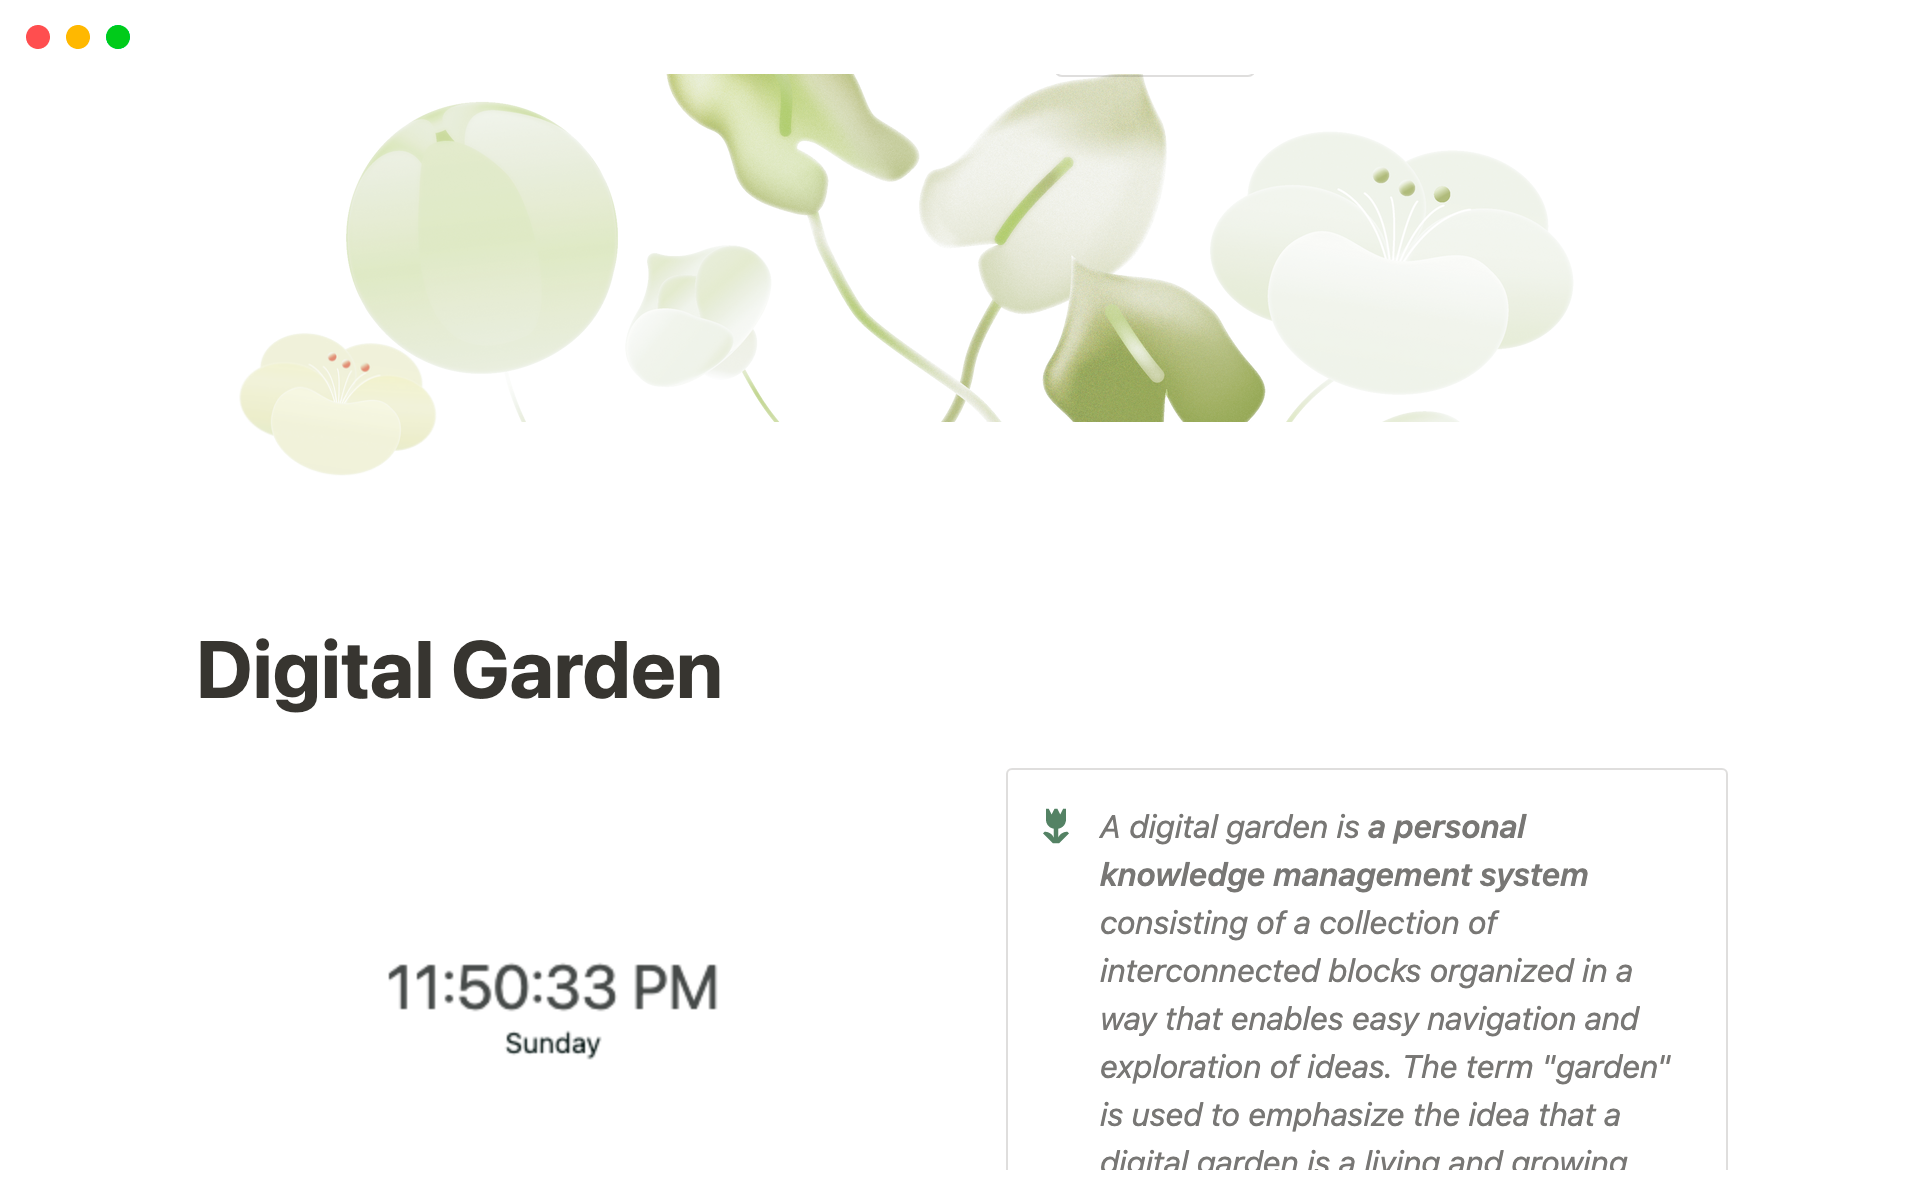 A digital garden is a personal knowledge management system consisting of a collection of interconnected blocks organized in a way that enables easy navigation and exploration of ideas.